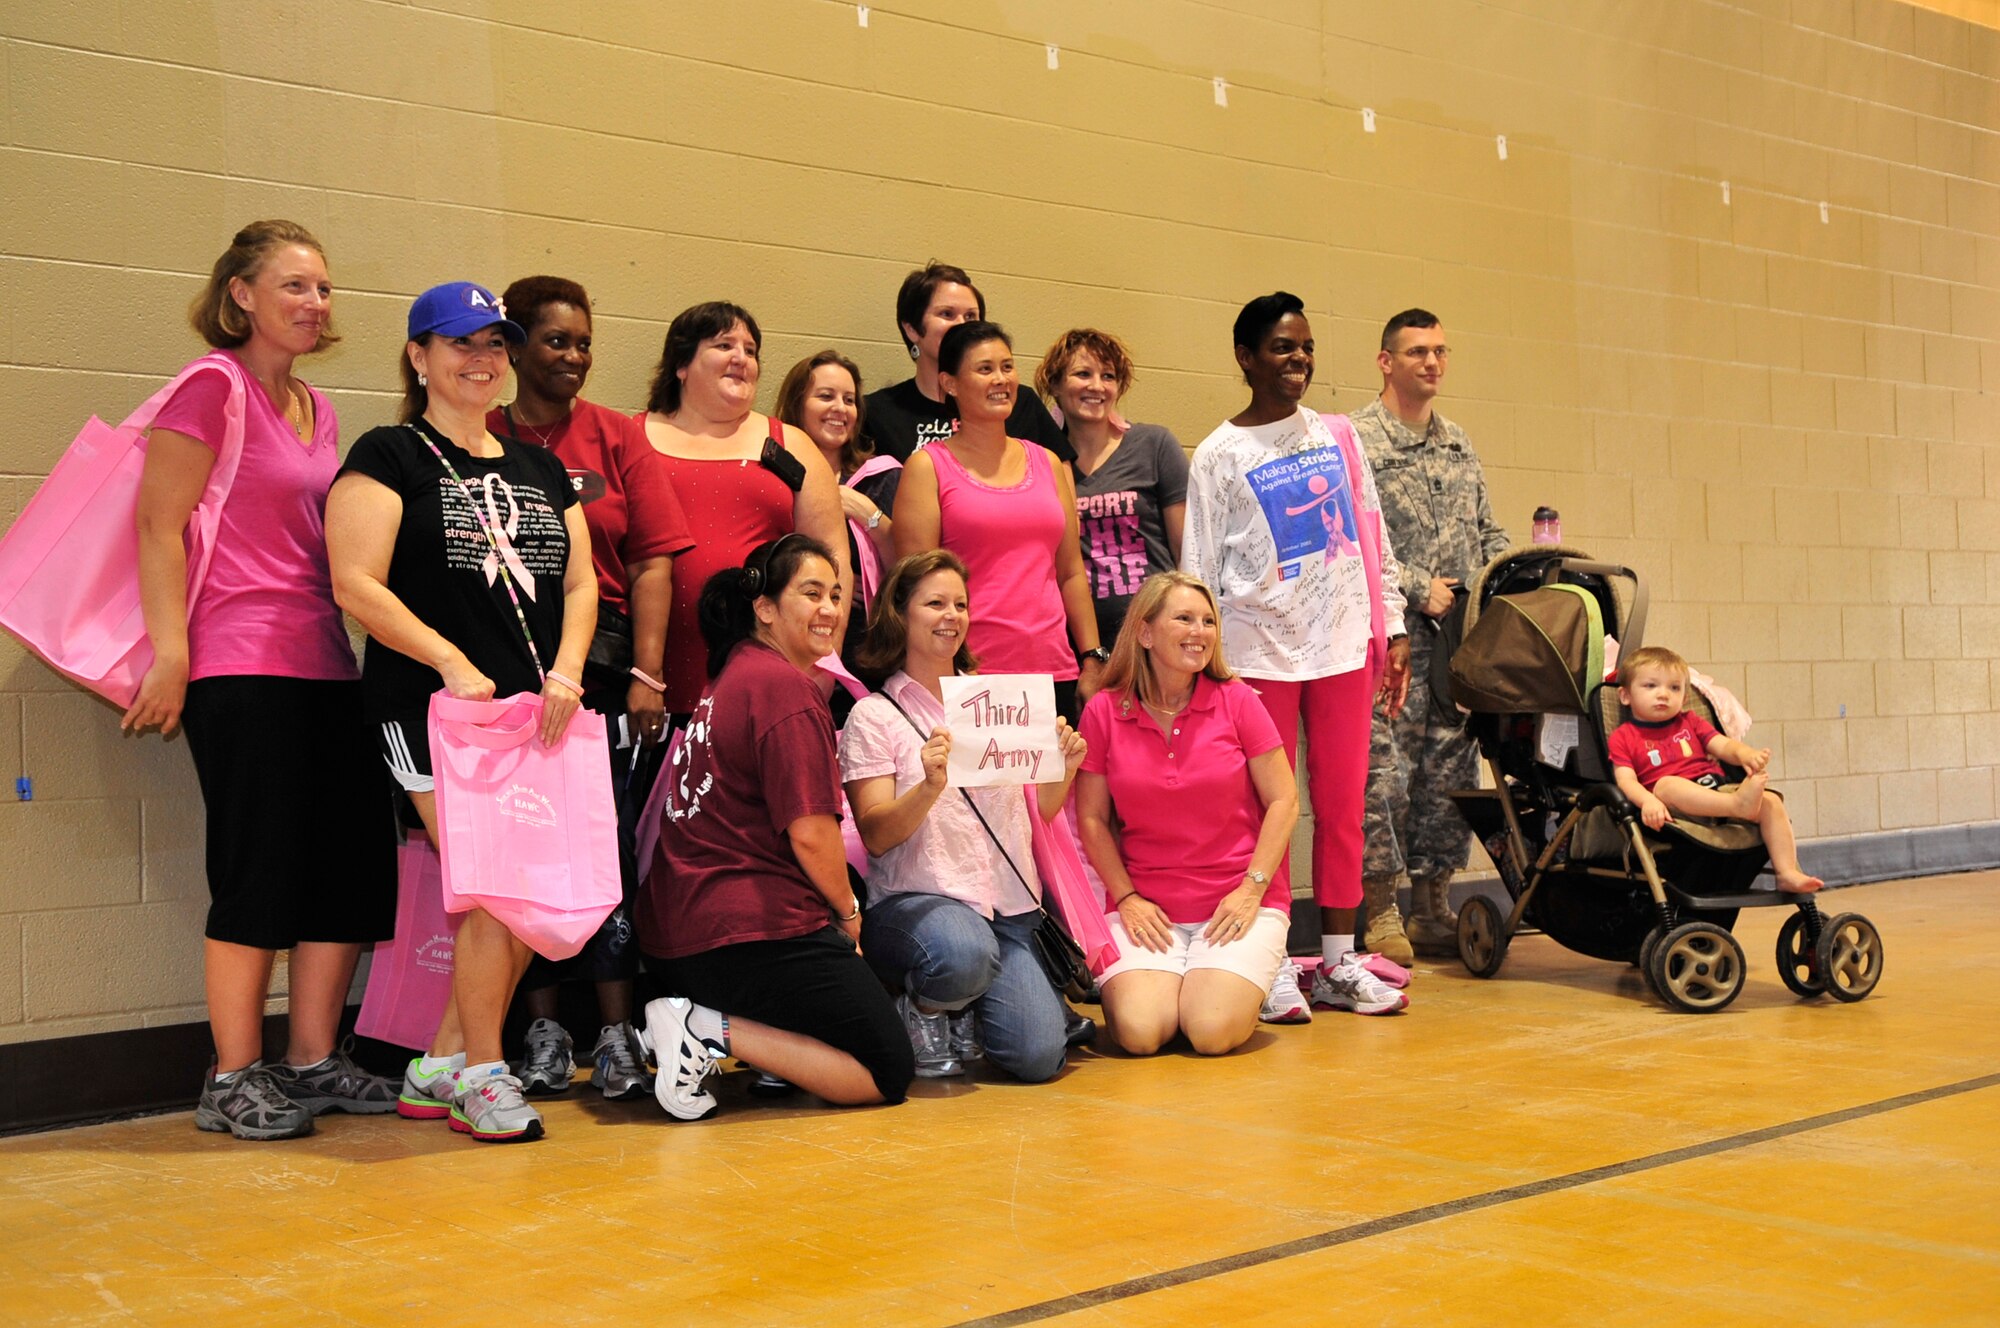 U.S. Army Soldiers and families gather for a group photo during the annual breast cancer awareness walk at the fitness center, Shaw Air Force Base, S.C., Oct. 2, 2012.  The event was held by the Health and Wellness Center along with the 20th Medical Group.  More than 100 people participated in the walk. (U.S. Air Force photo by Airman Nicole Sikorski/Released)